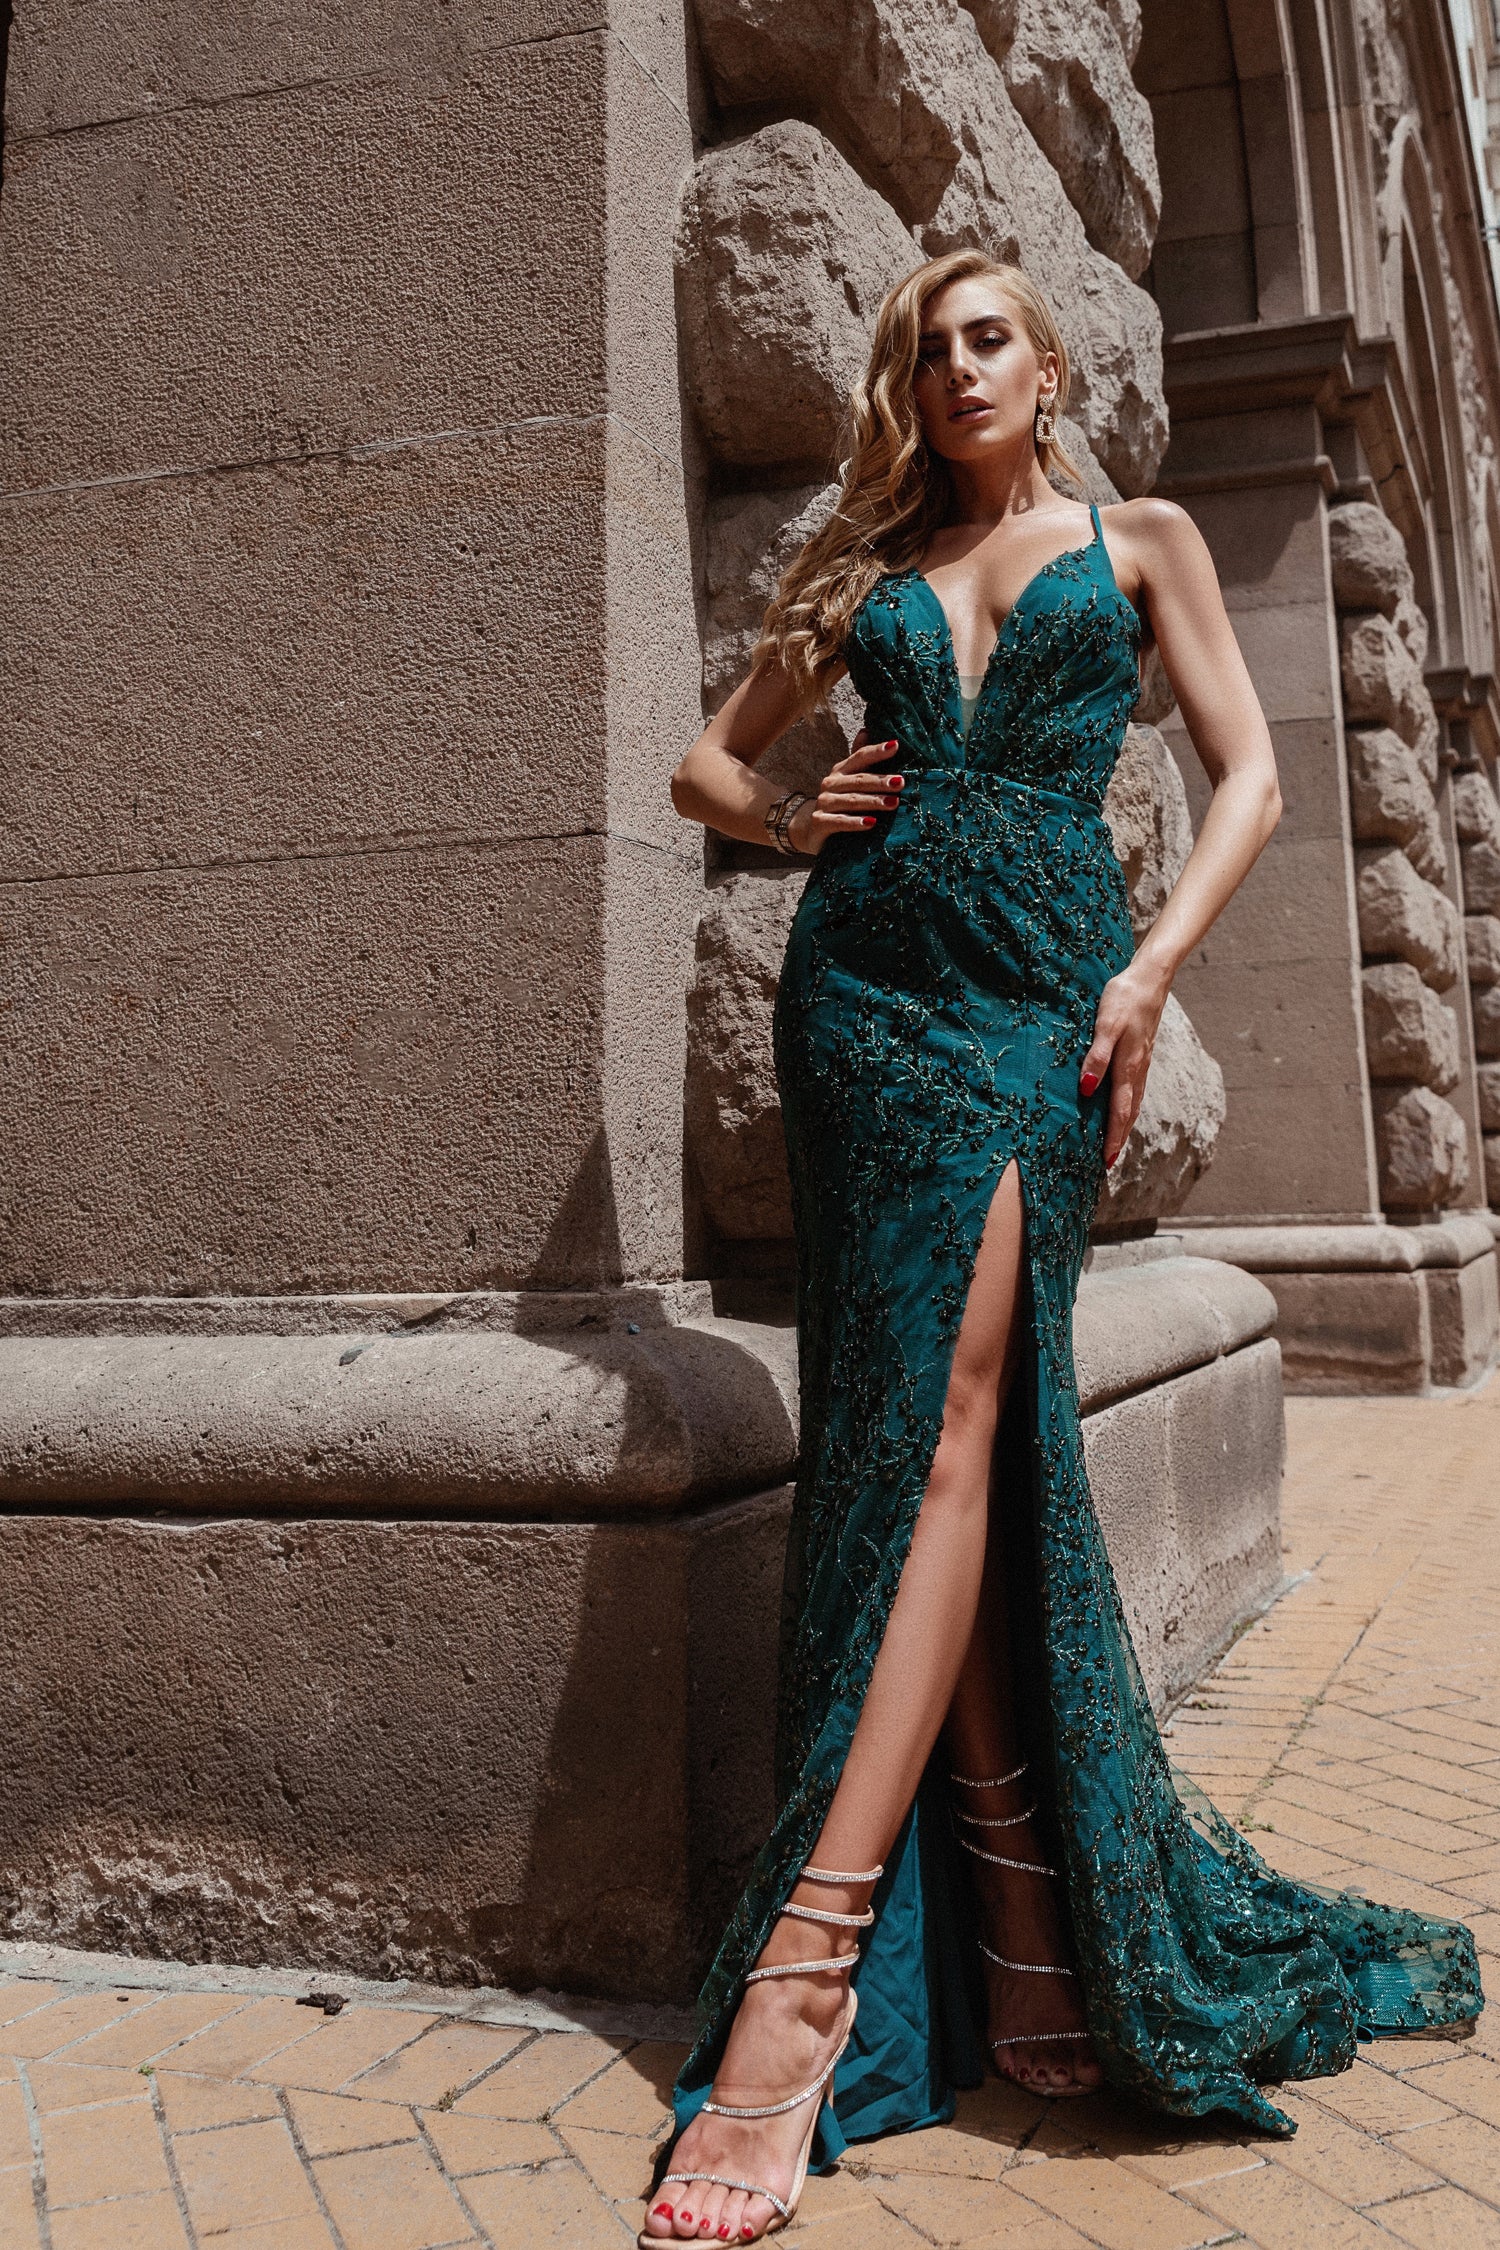 Tina Holly Couture TW031 Emerald Green Deep V Neckline With Beaded Sequins Mermaid Formal Gown Dress